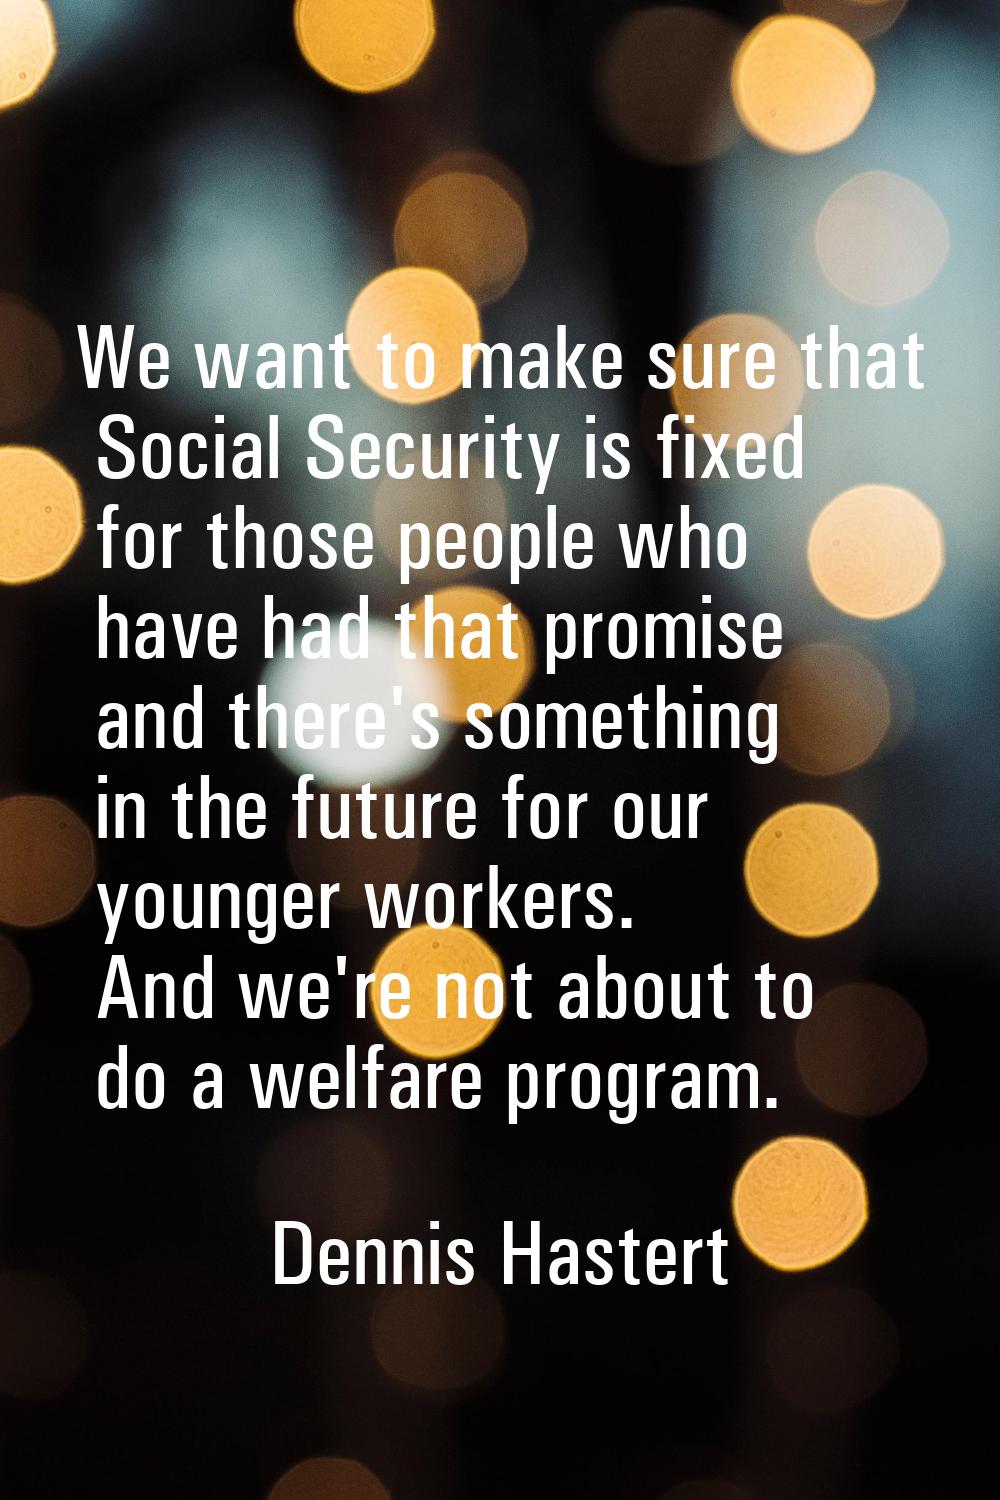 We want to make sure that Social Security is fixed for those people who have had that promise and t